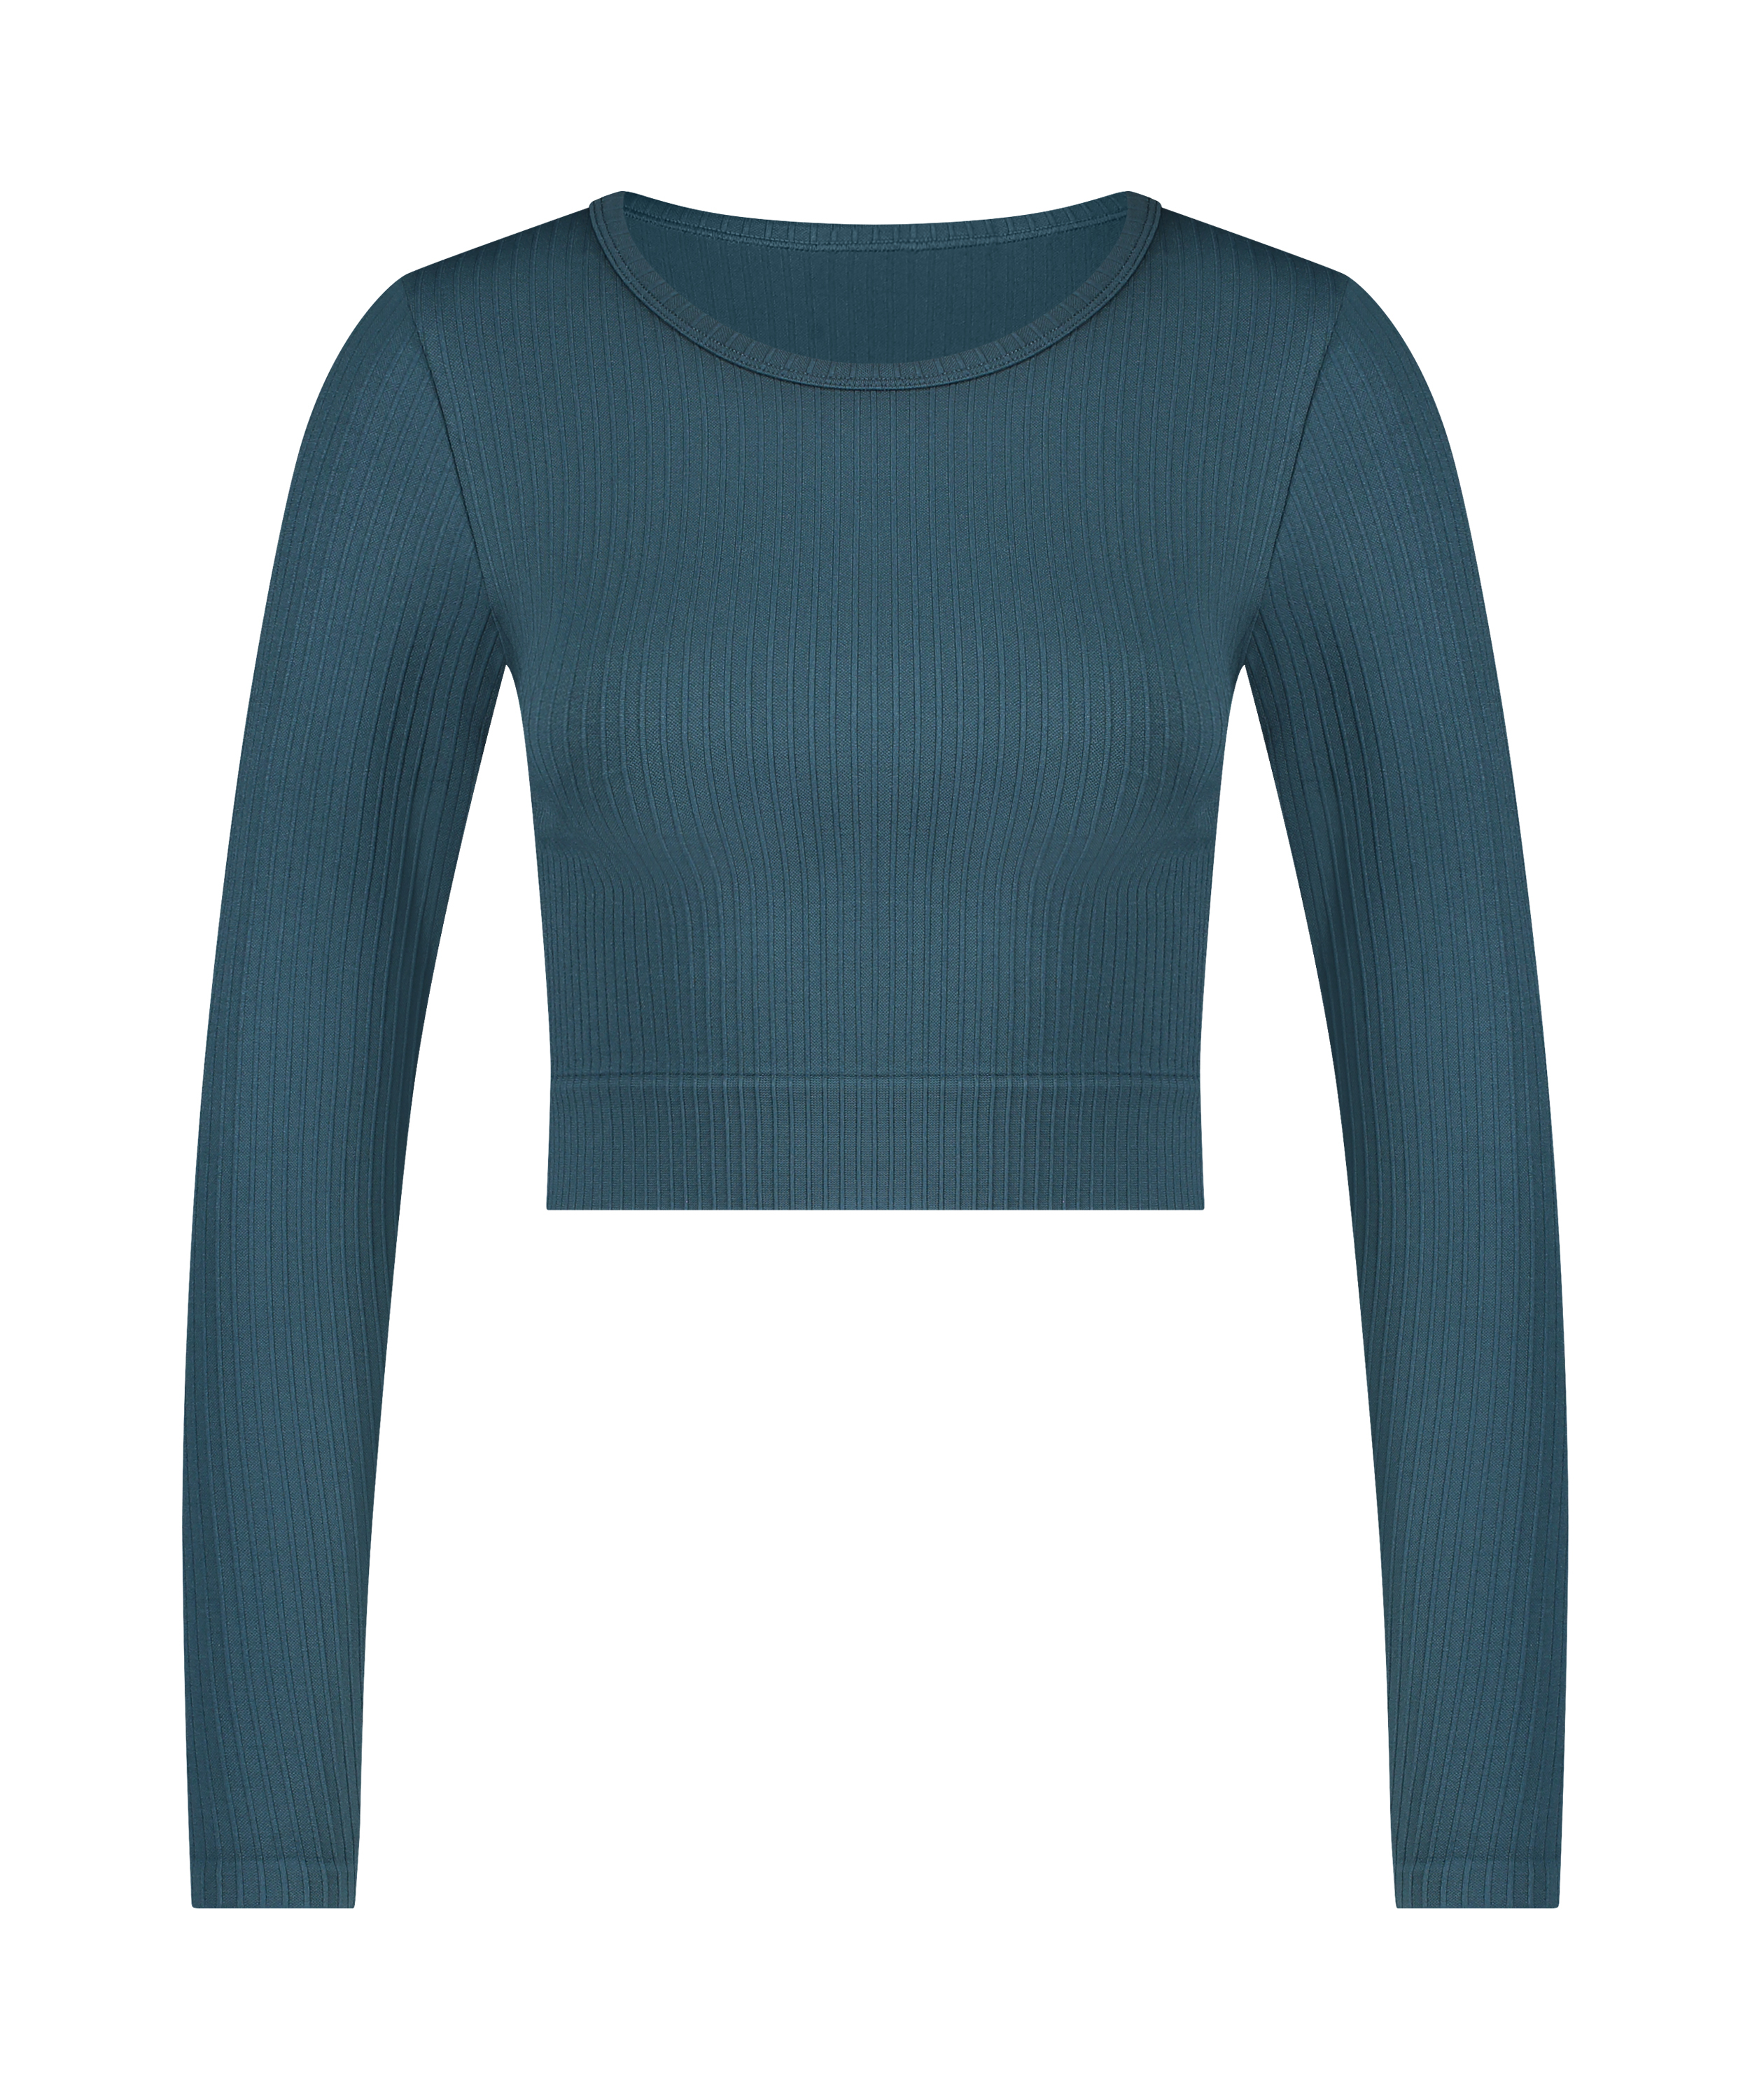 HKMX Seamless Sport Cropped Top, Blue, main